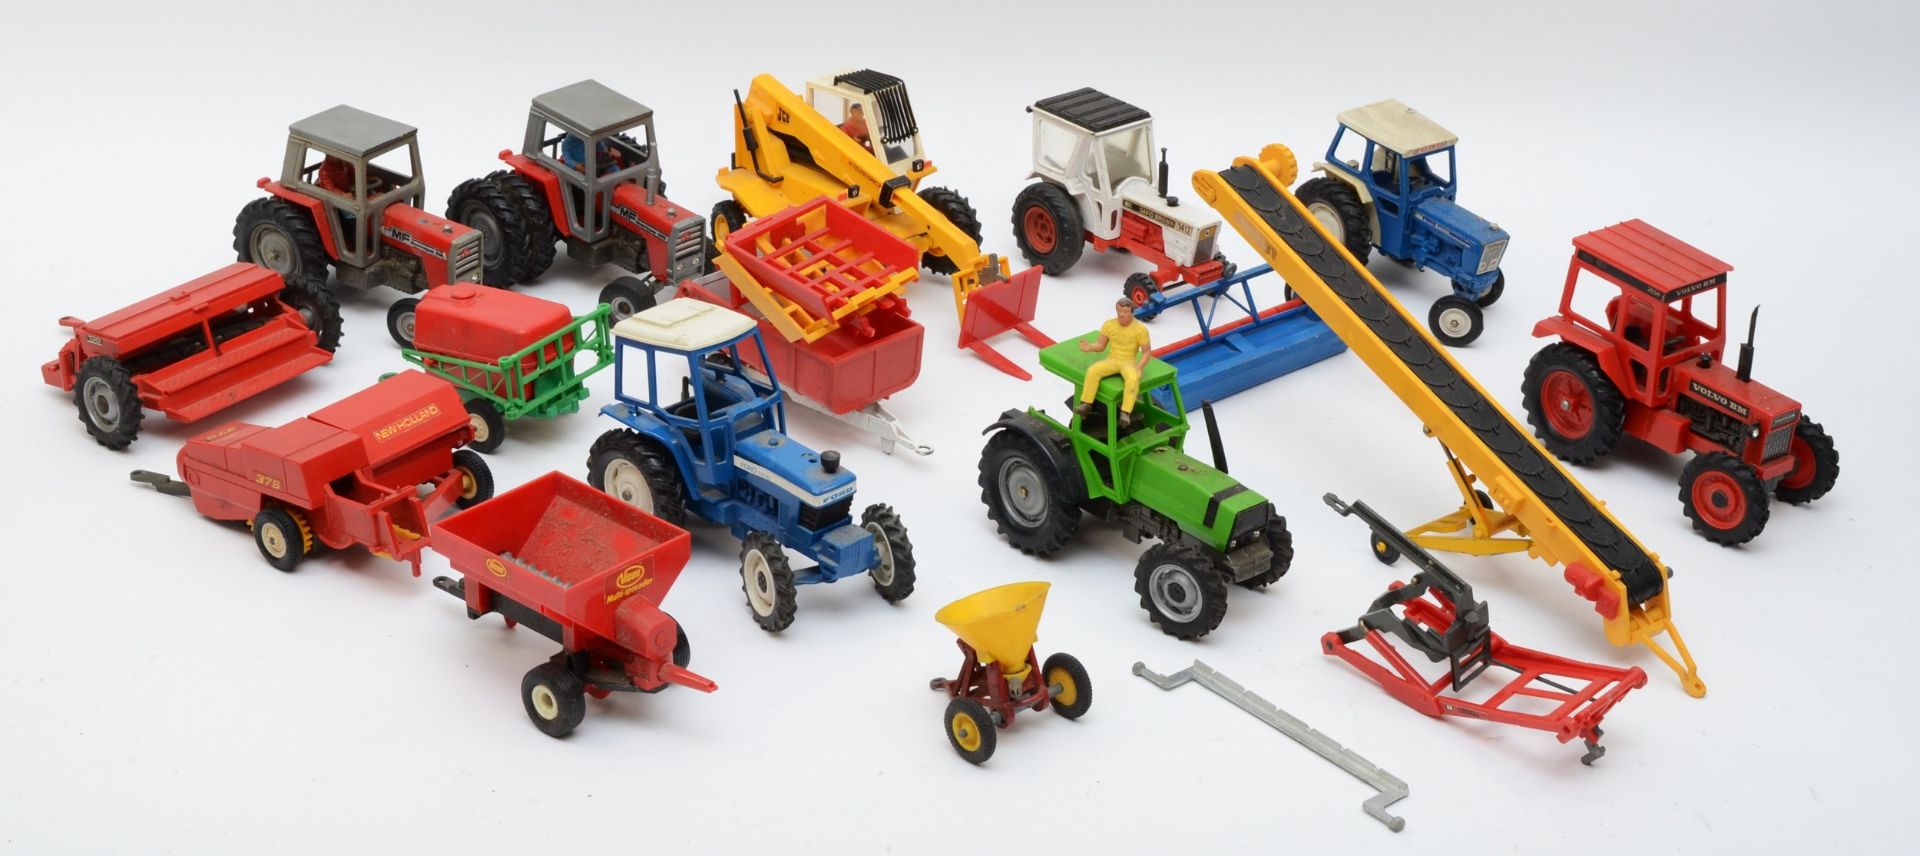 A collection of playworn diecast models of tractors with farming implements by Britains, circa